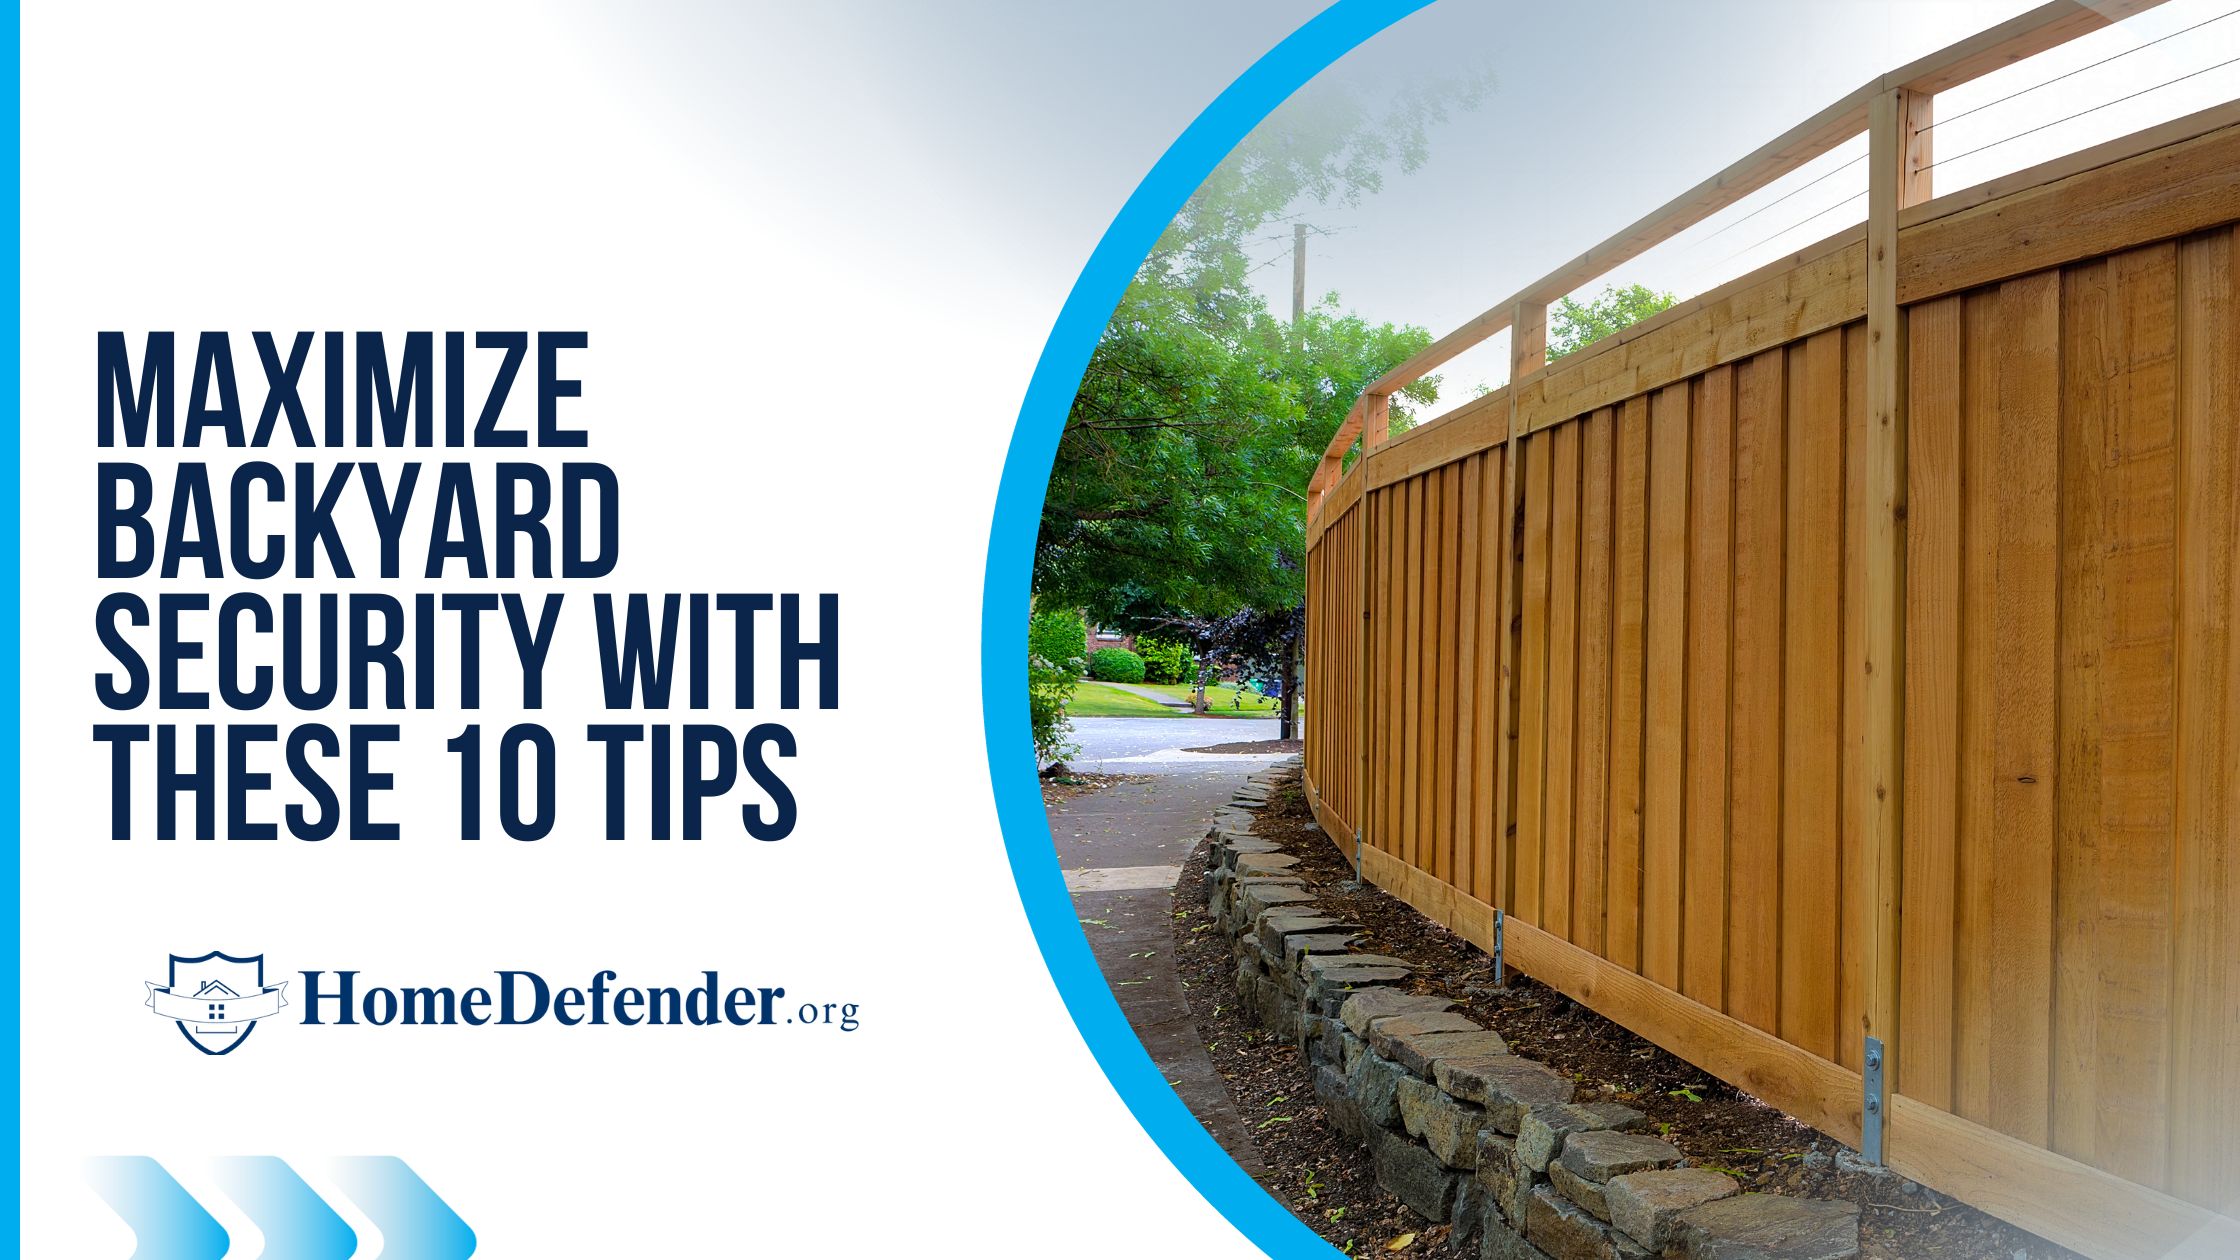 Maximize Backyard Security With These 10 Tips